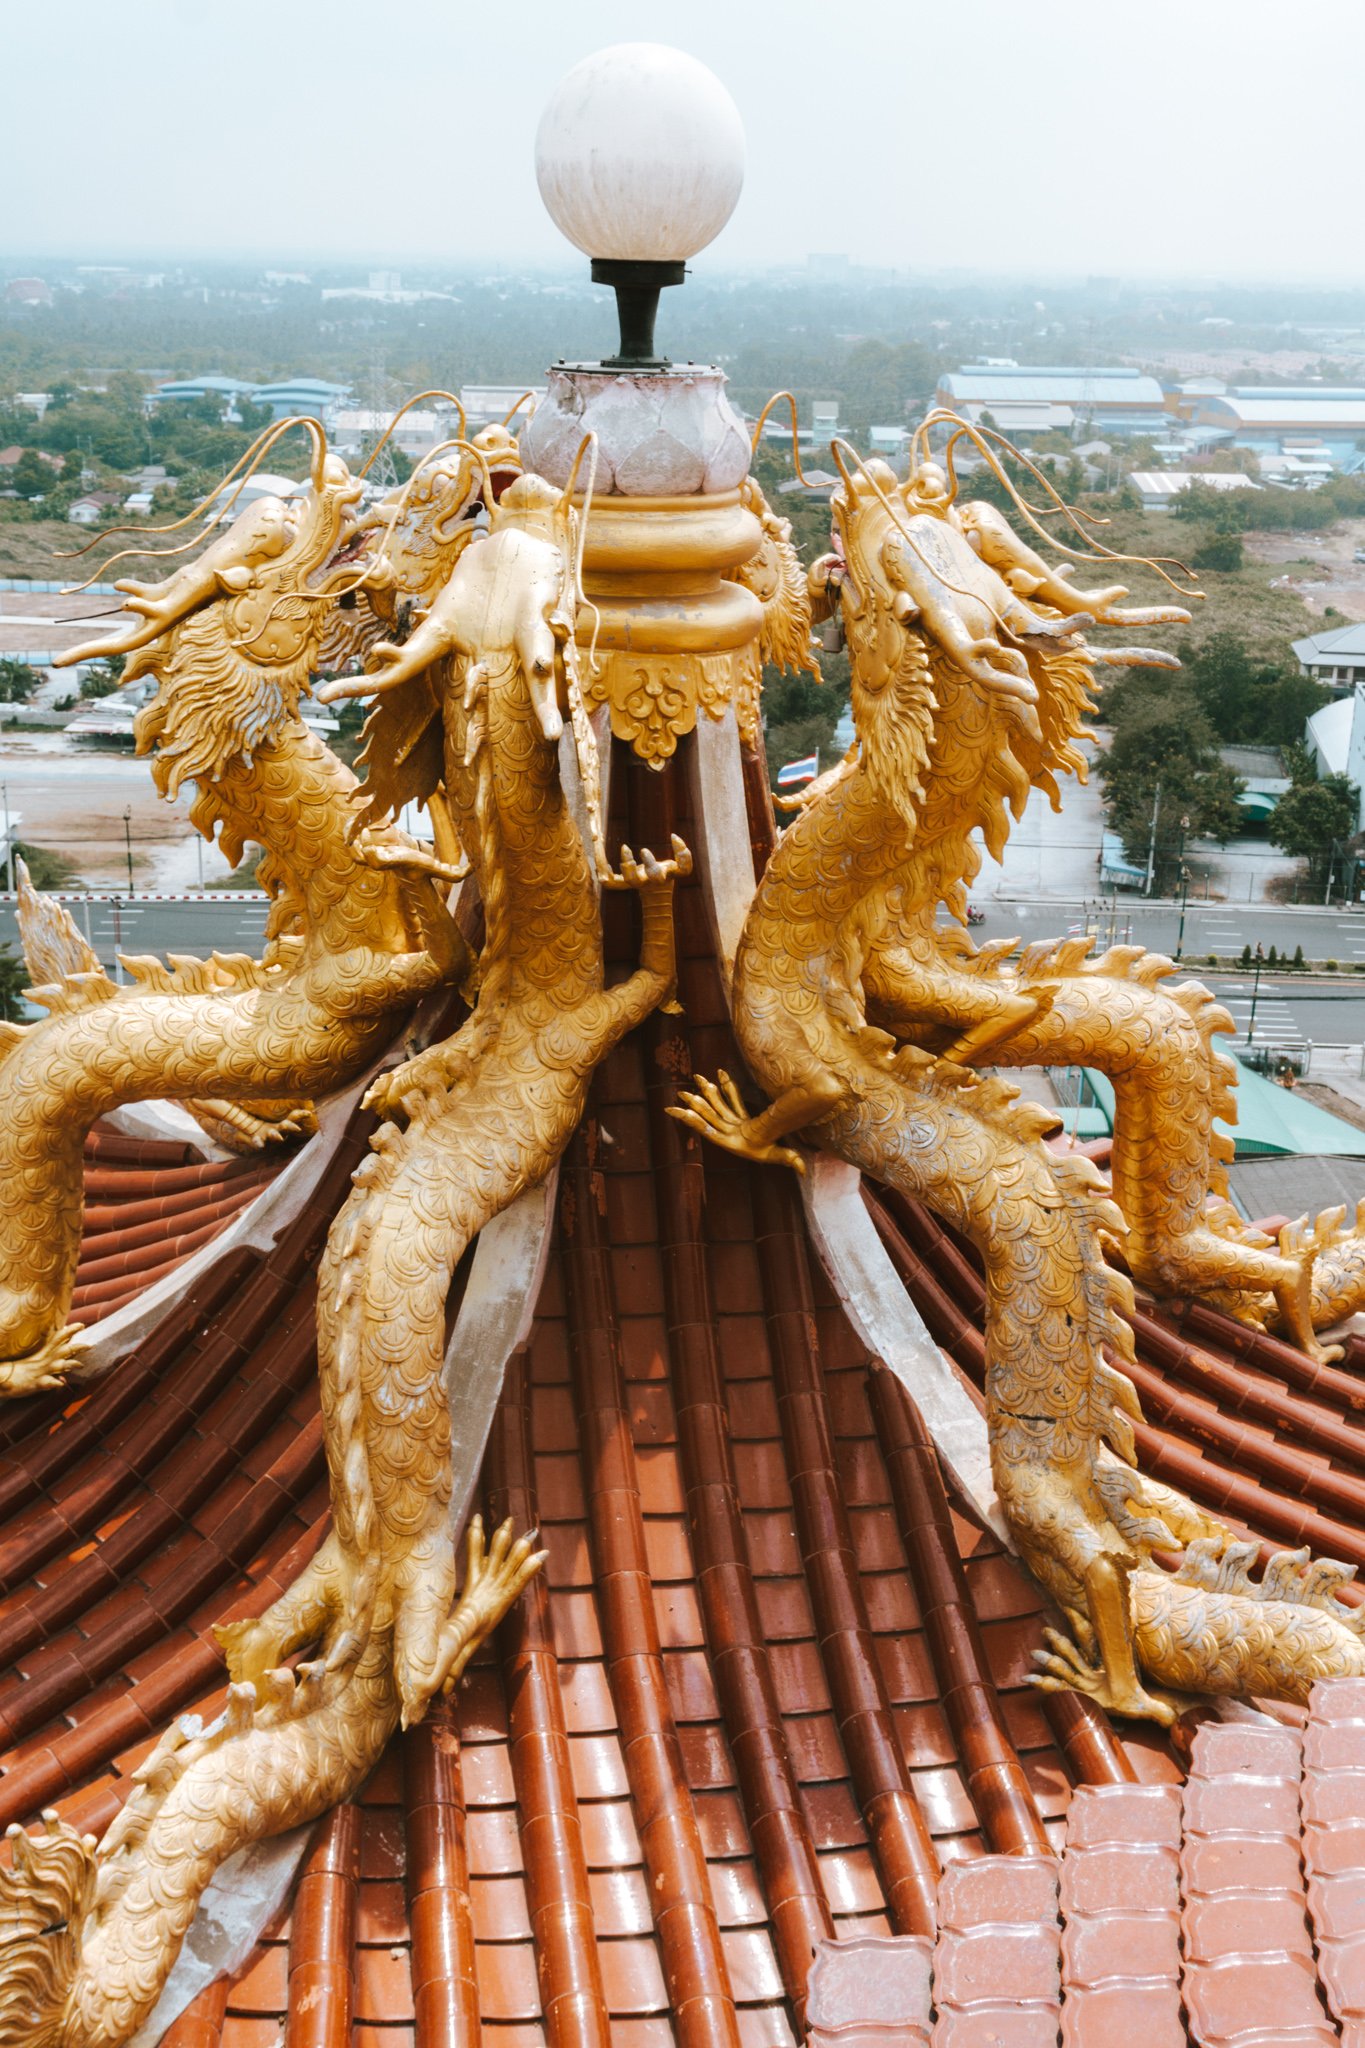 view from the top of the Dragon Temple, Wat Samphran